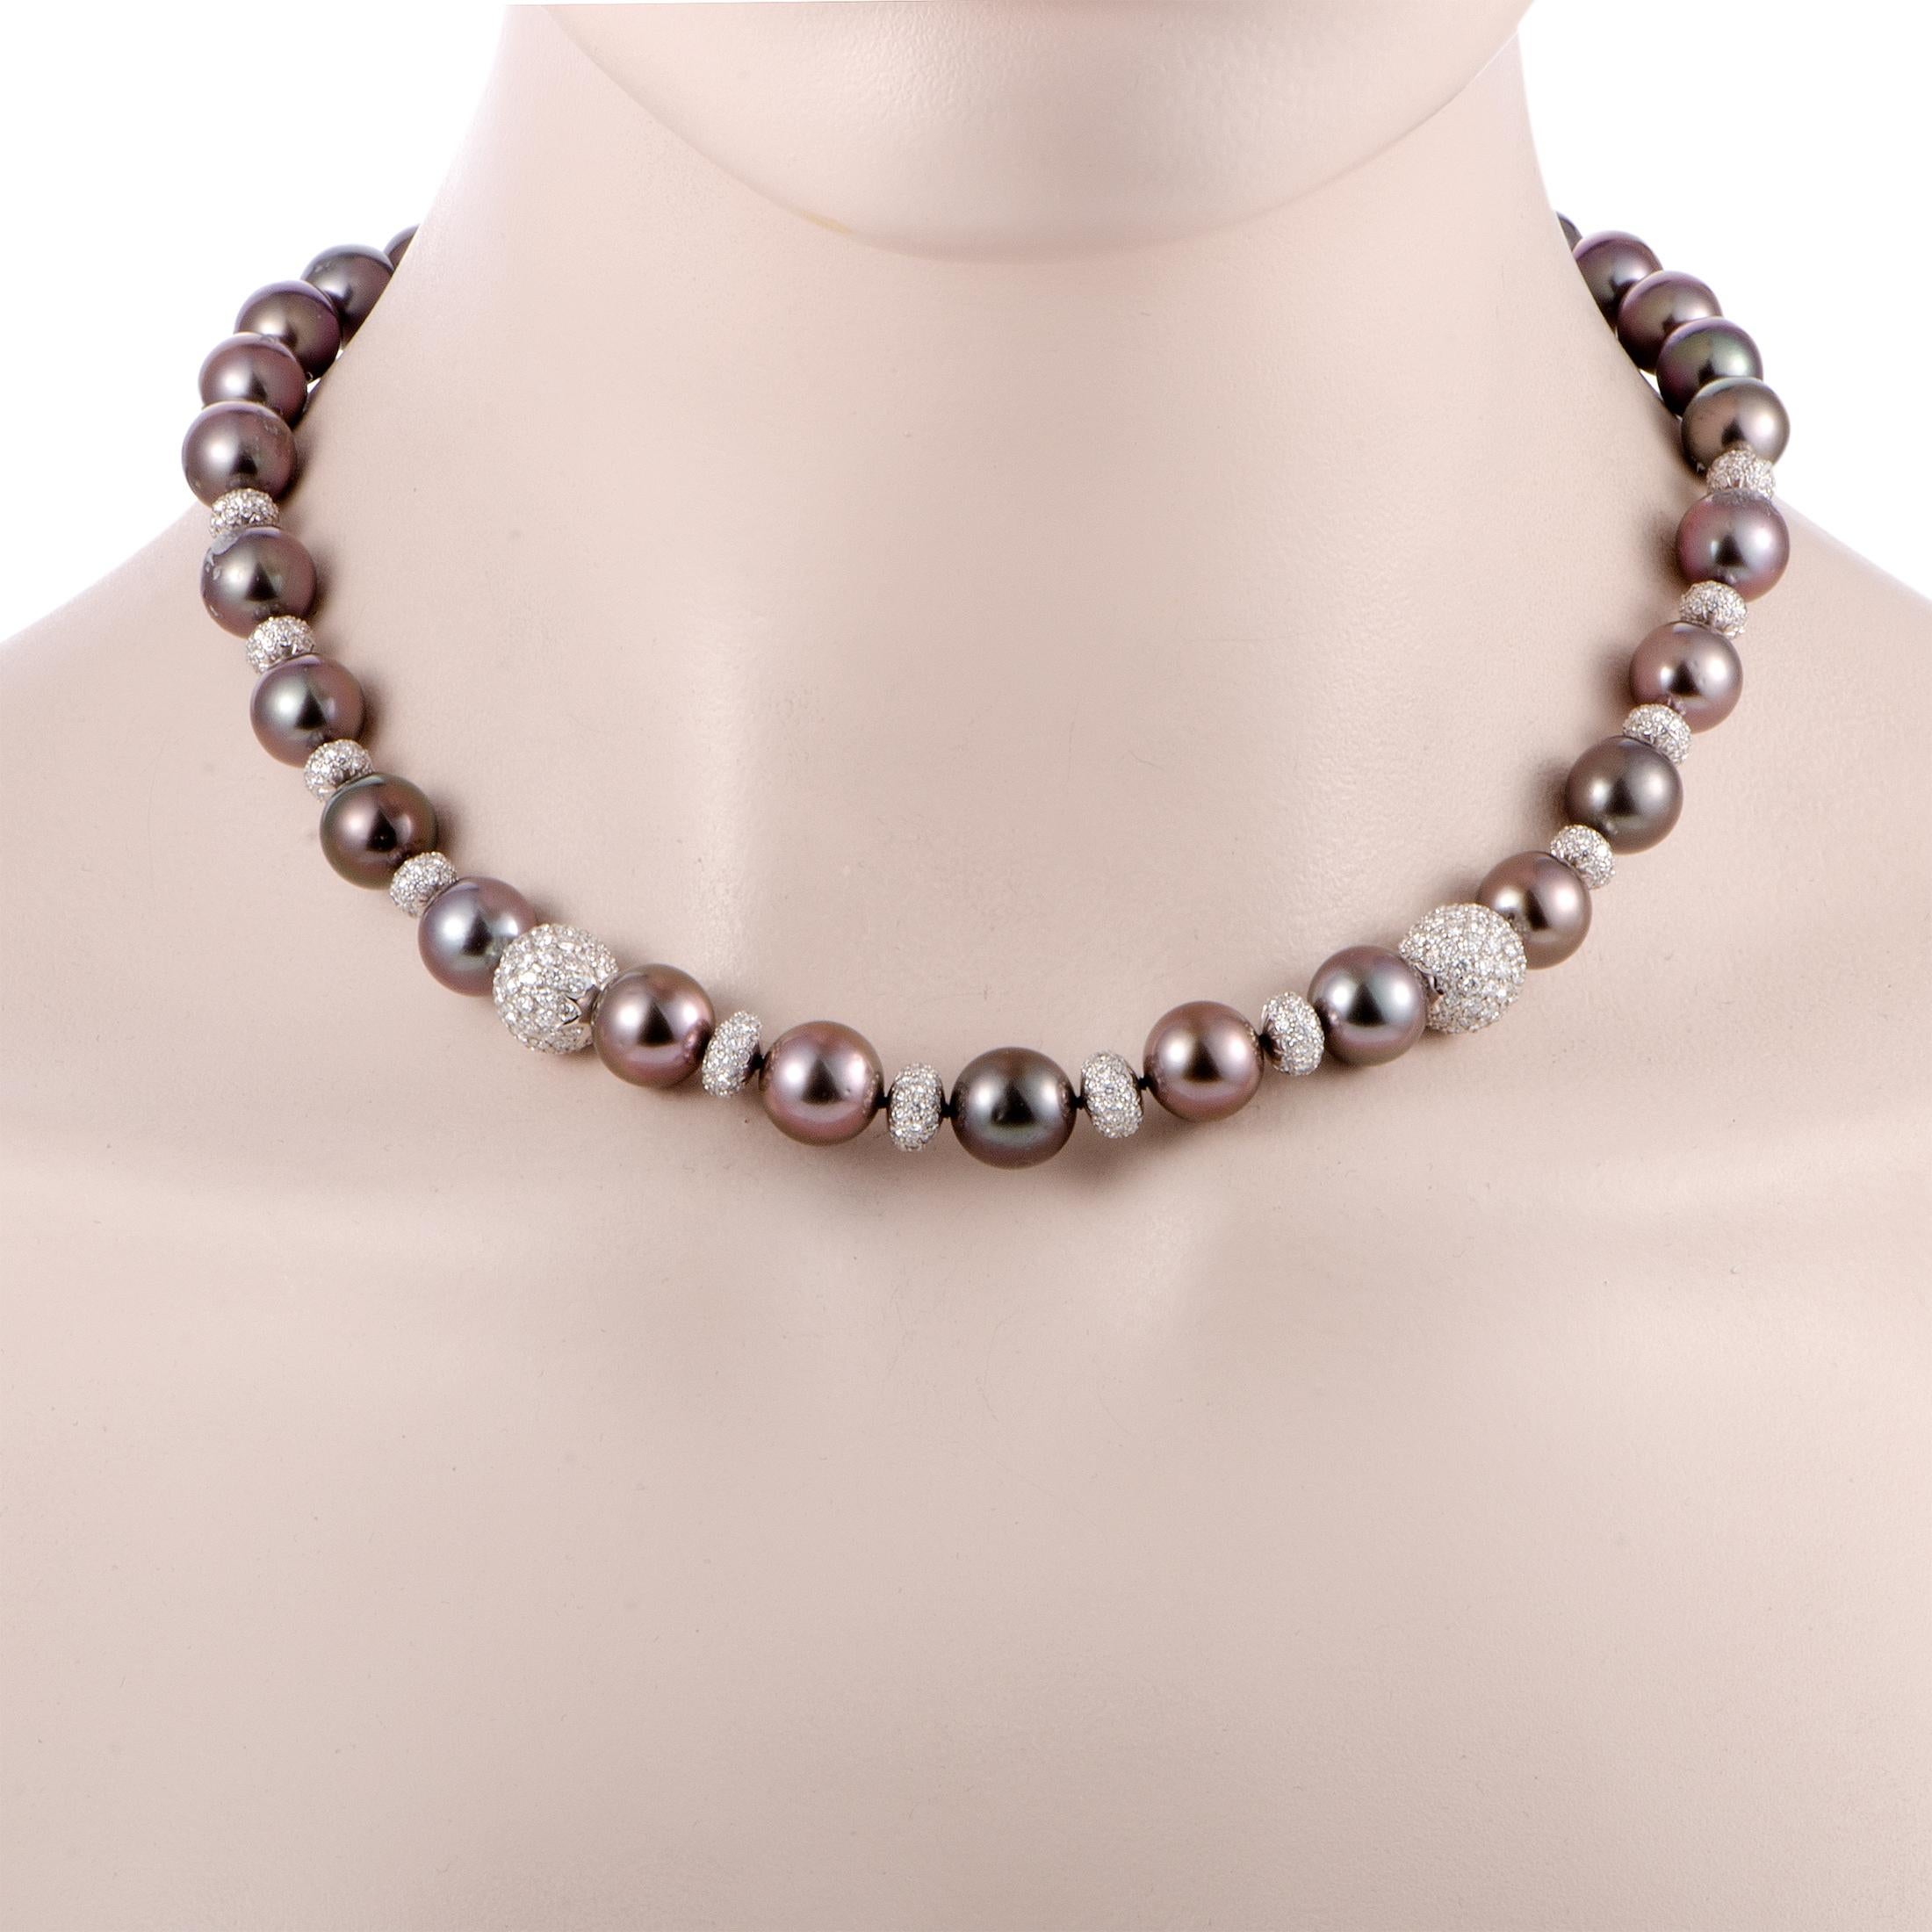 A splendidly stylish design is combined with exceptionally lustrous décor in this fabulous Tiffany & Co. necklace that will accentuate your ensemble in a remarkably luxe manner. The necklace is made of platinum and embellished with delightful